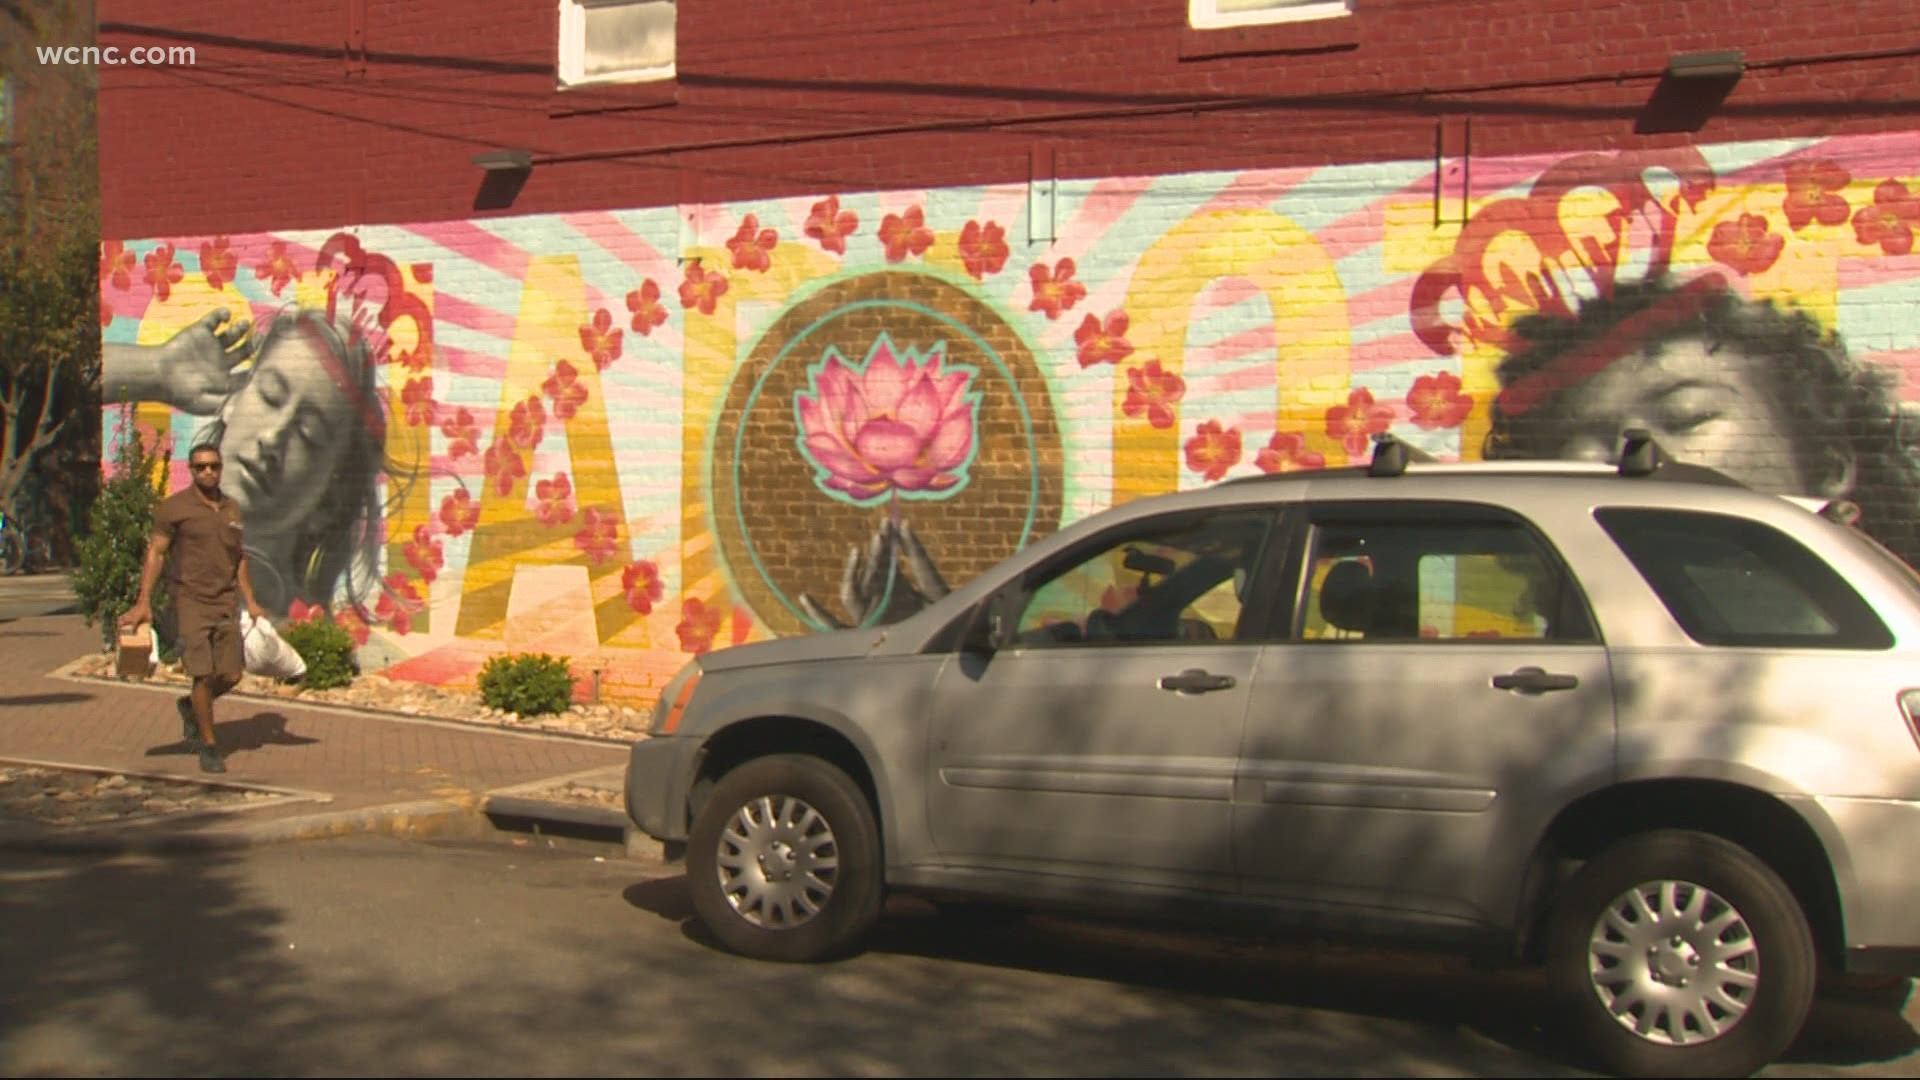 There are dozens of murals in the Charlotte area that are hidden around so many corners and alley ways.